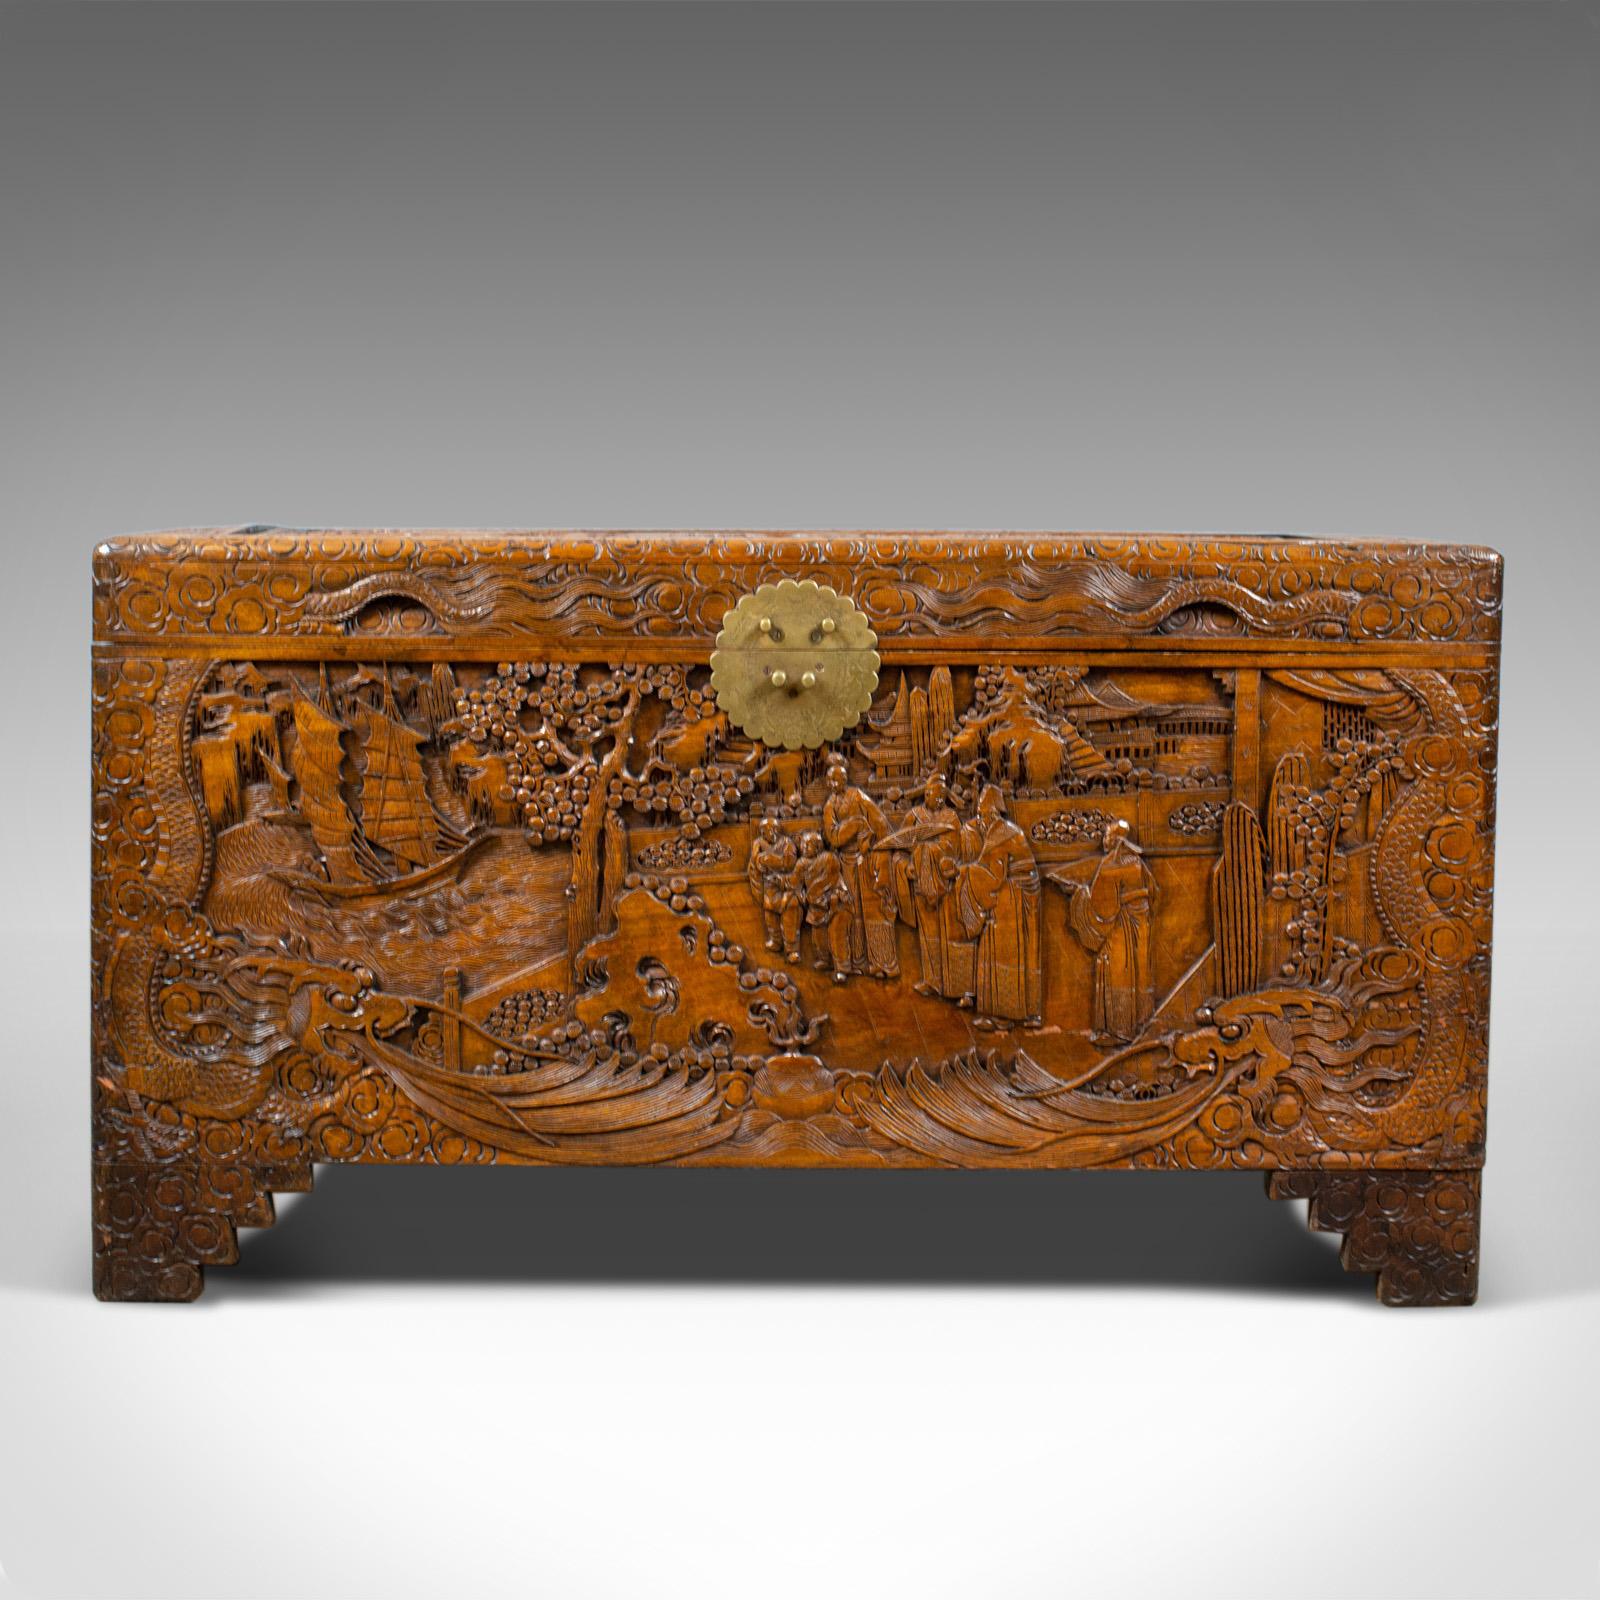 This is a vintage camphor wood chest with oriental carved scenes. A trunk dating to the early 20th century, circa 1940.

Fabulously decorated with profusely carved panels
Framed in geometric swirled borders
Standing upon typical step bracket